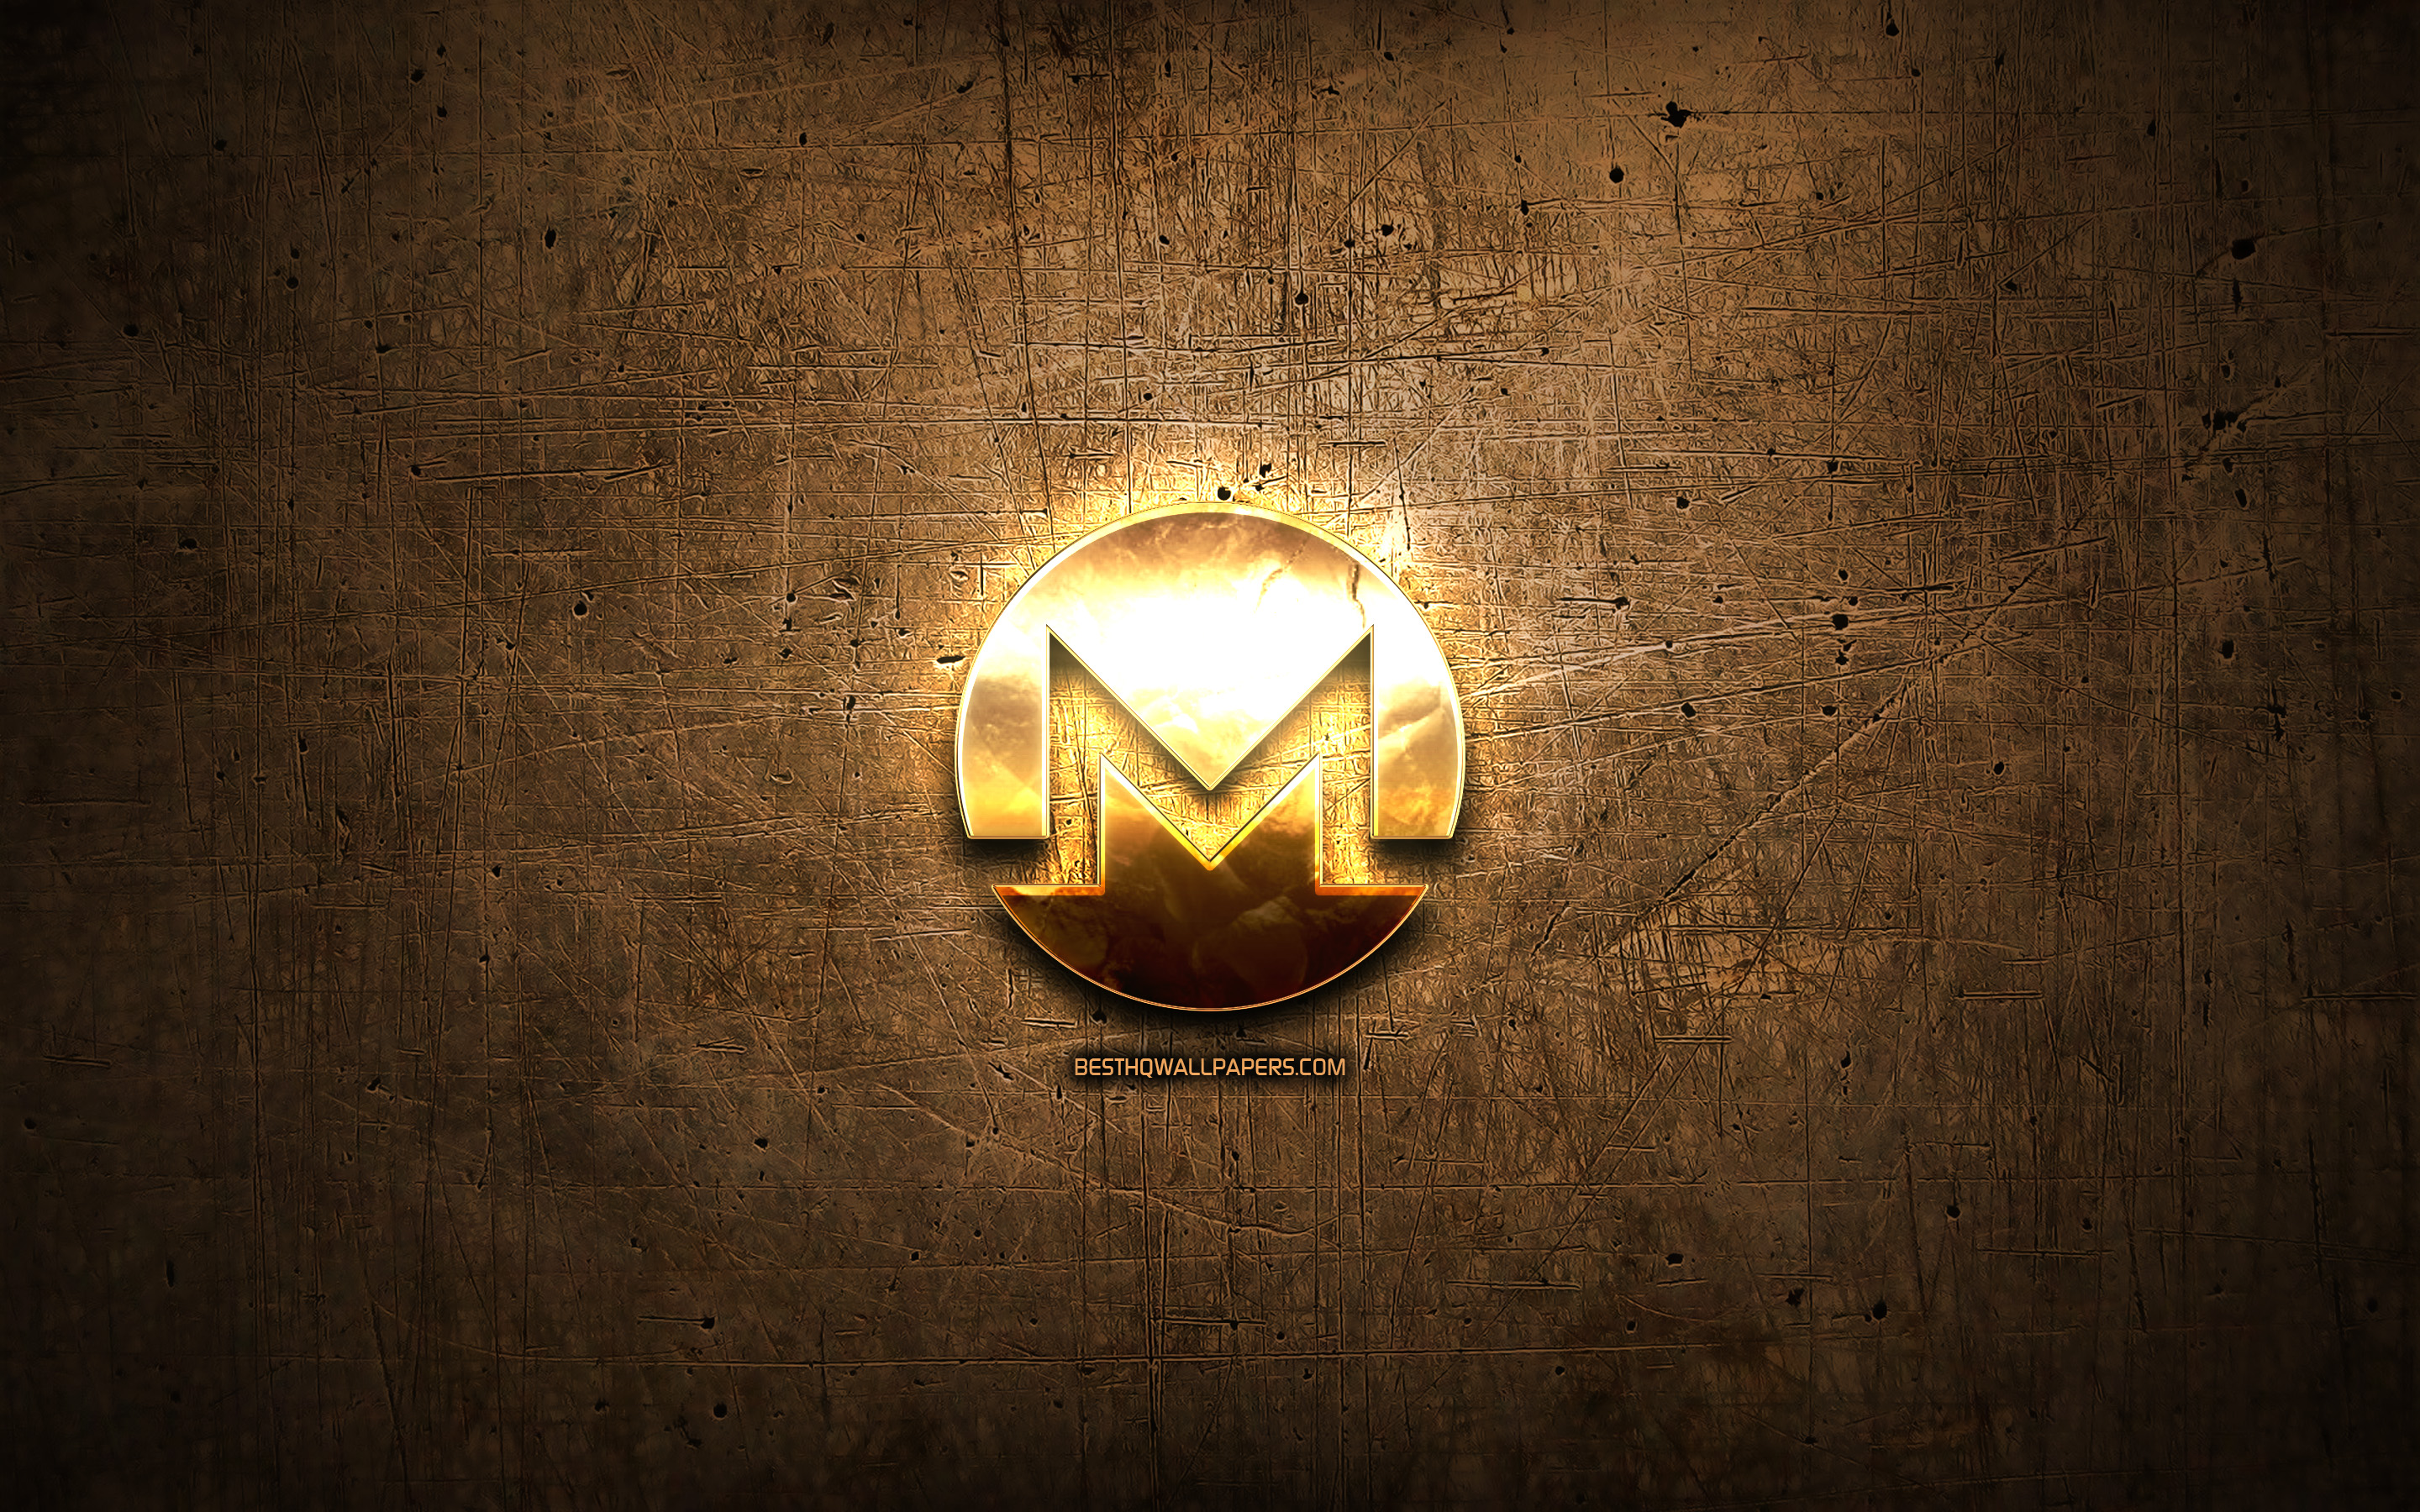 Download wallpaper Monero golden logo, cryptocurrency, brown metal background, creative, Monero logo, cryptocurrency signs, Monero for desktop with resolution 2880x1800. High Quality HD picture wallpaper